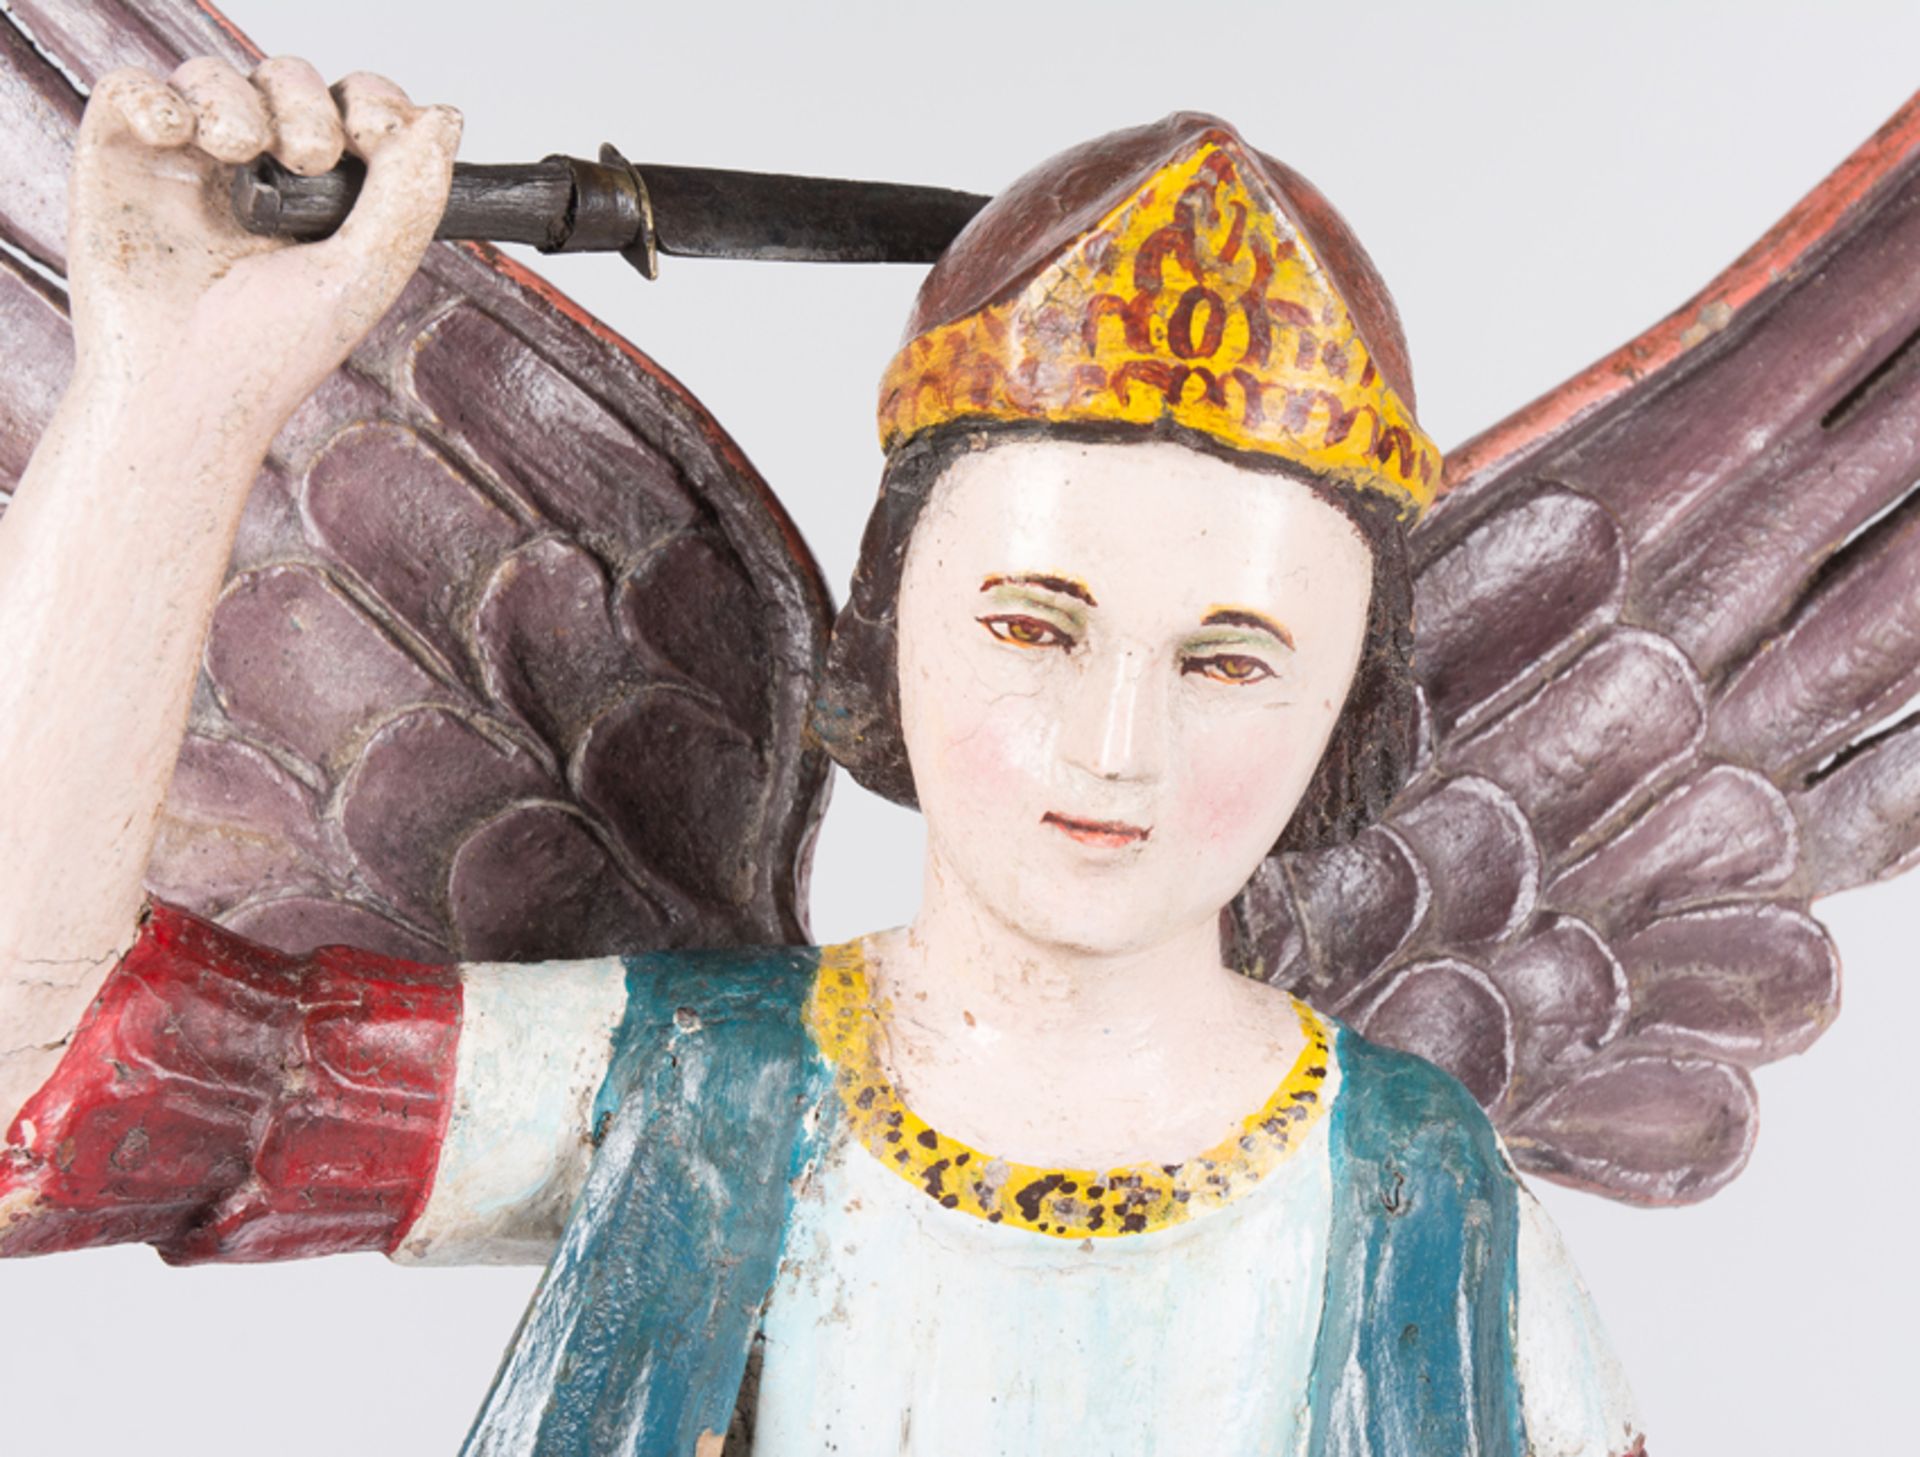 "Angel". Carved and polychromed wooden sculpture. Guarani School. Paraguay. 18th century. - Image 5 of 9